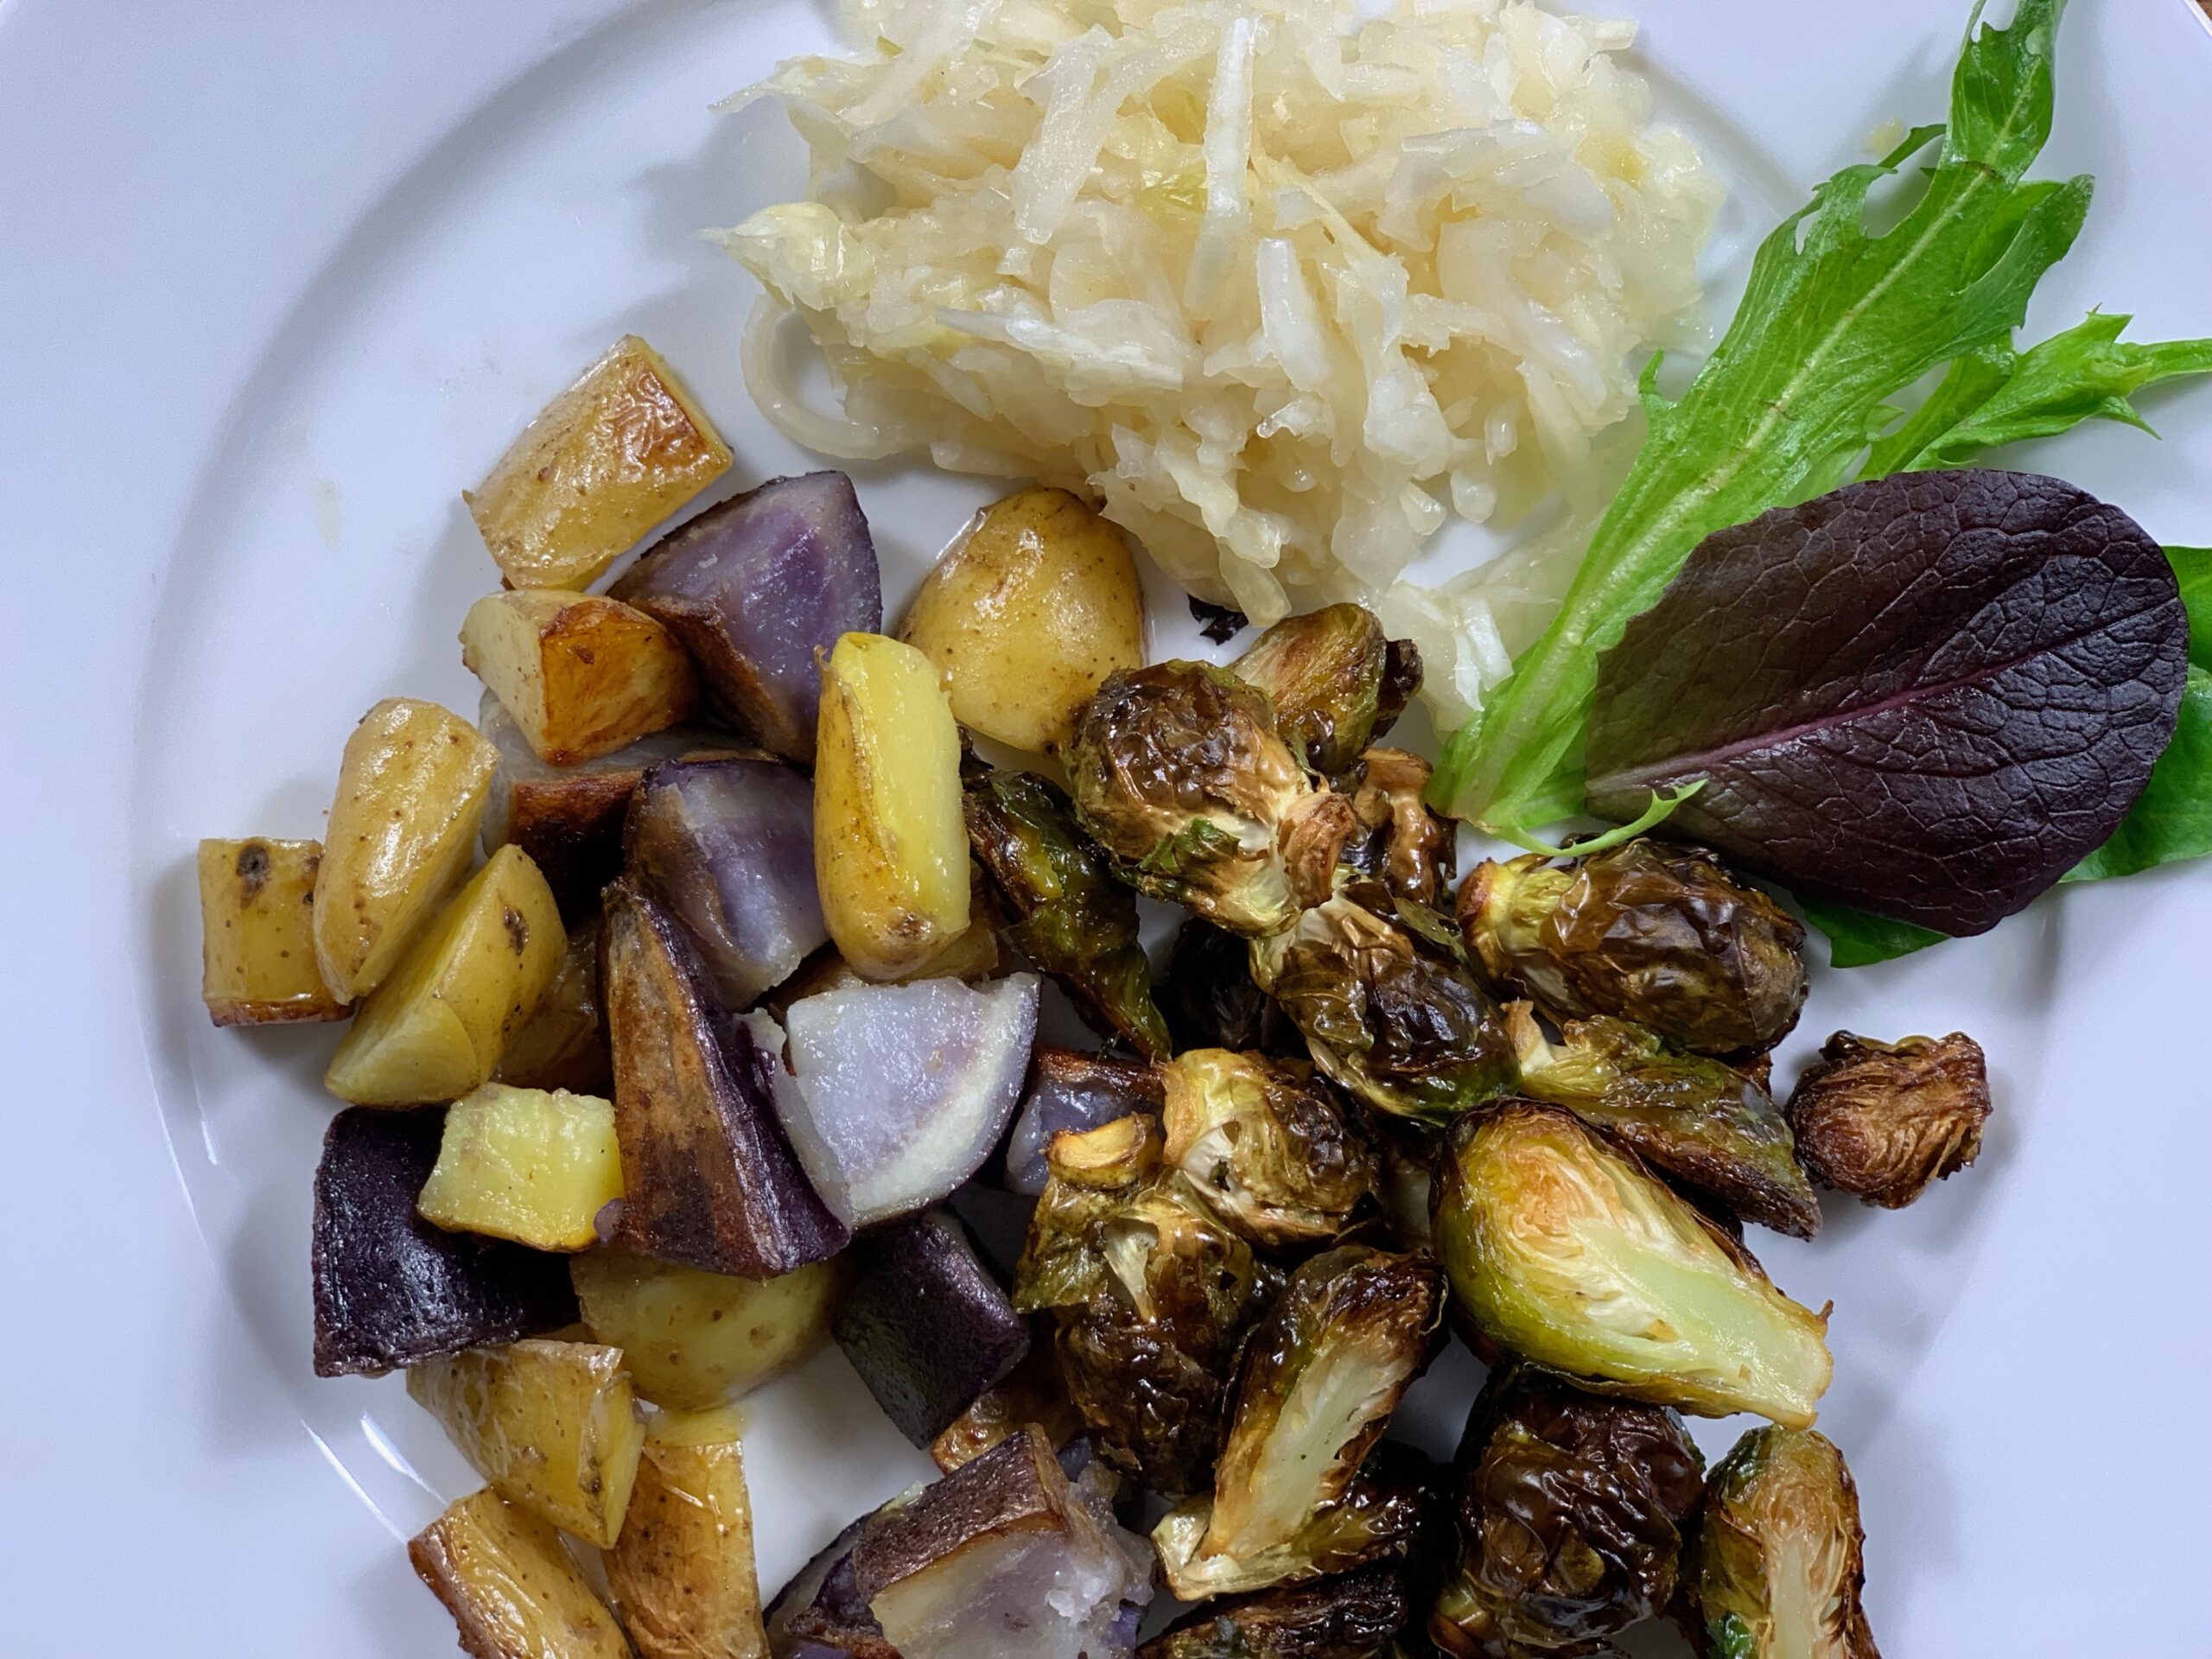 camel hump fat roasted brussel sprouts and fried potatoes